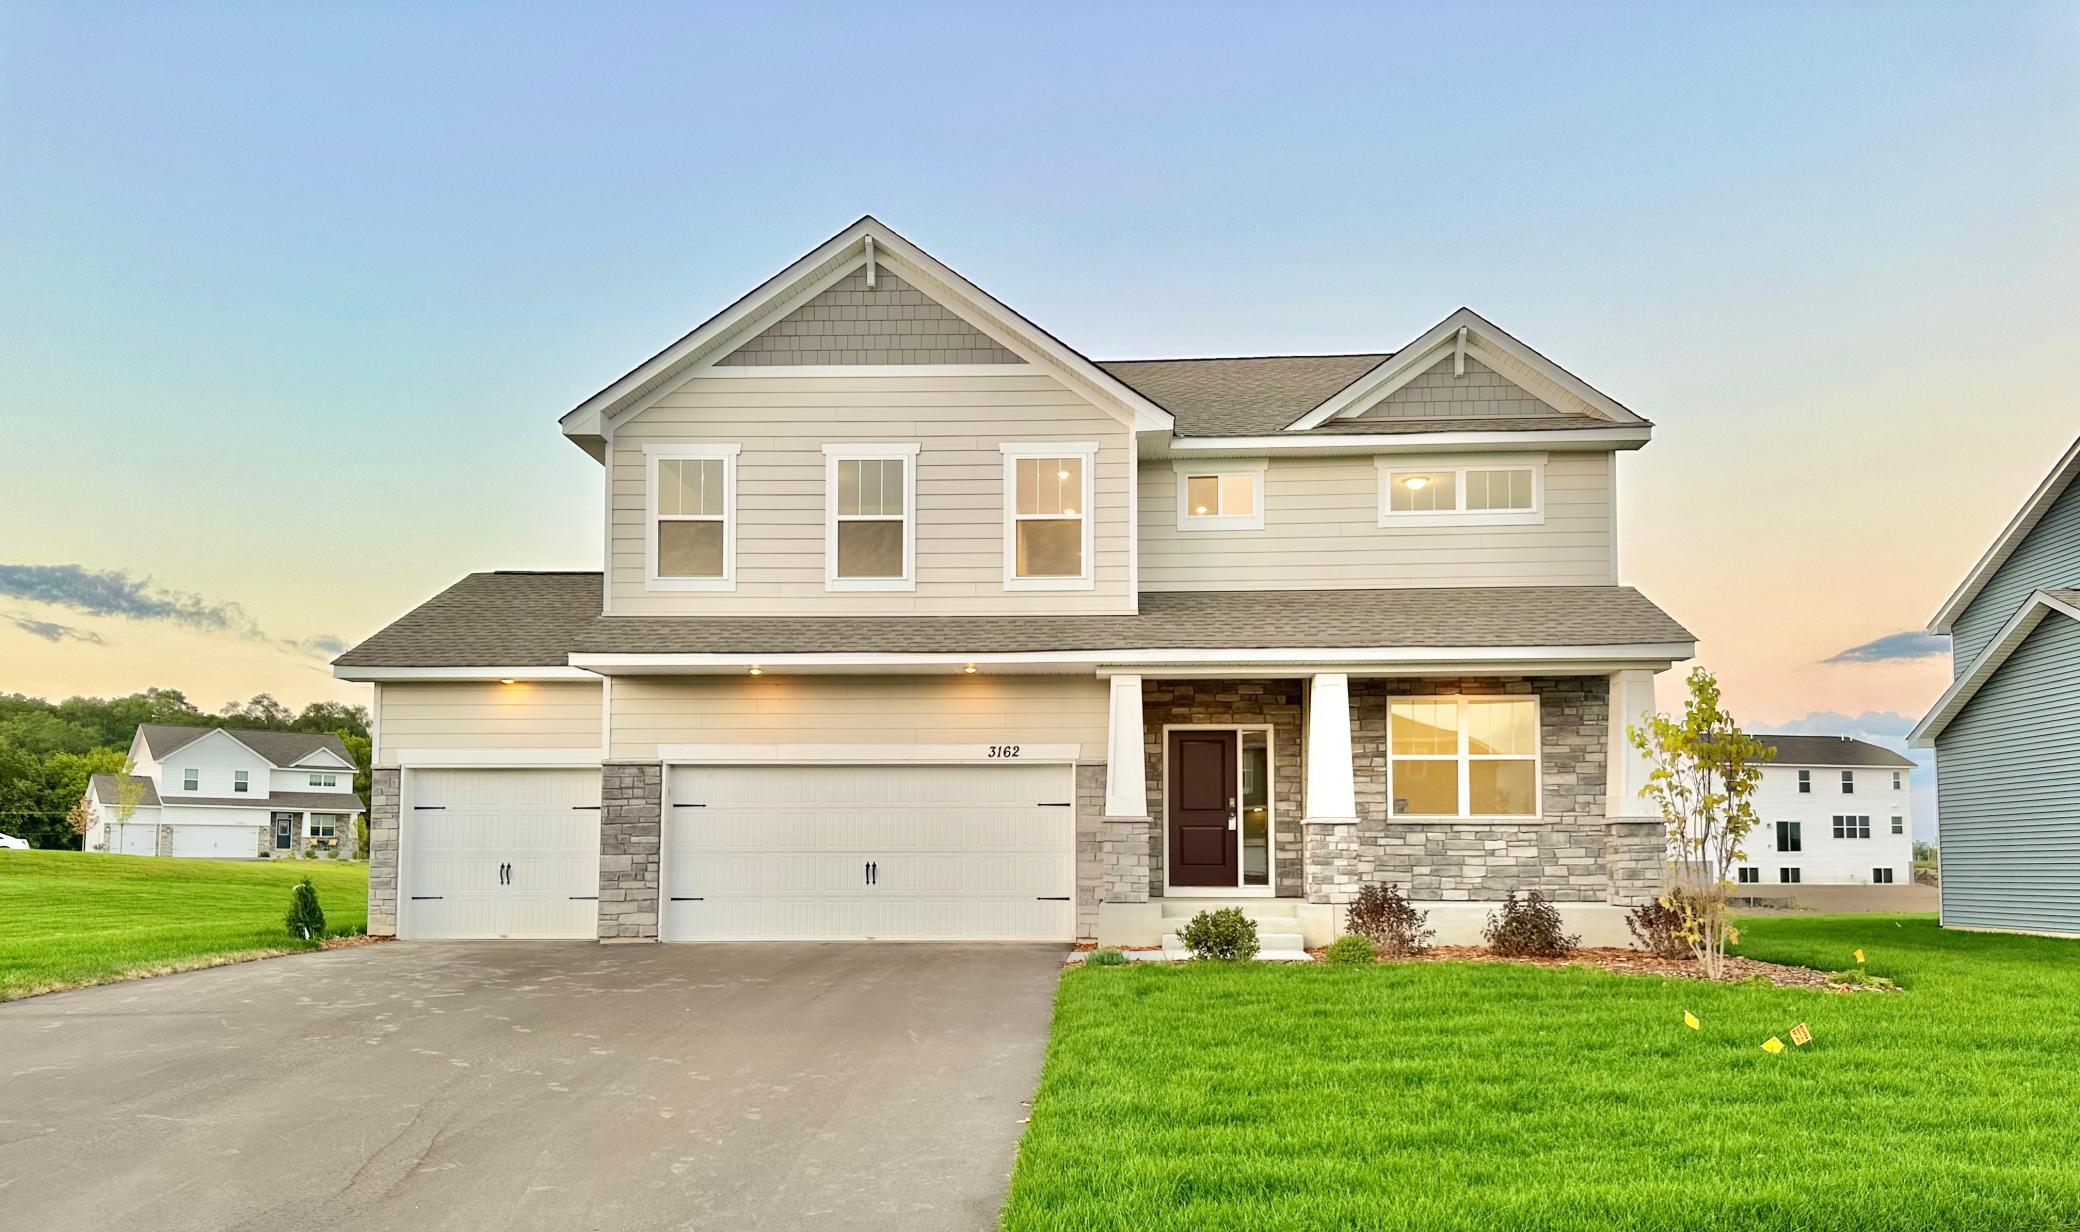 Welcome to 3162 Sunshine Curve! This Adams sits on a large corner homesite and offers a 3 car garage! Home will feature fully sodded yard with Smart Irrigation and Landscaping! Ready for move-in!